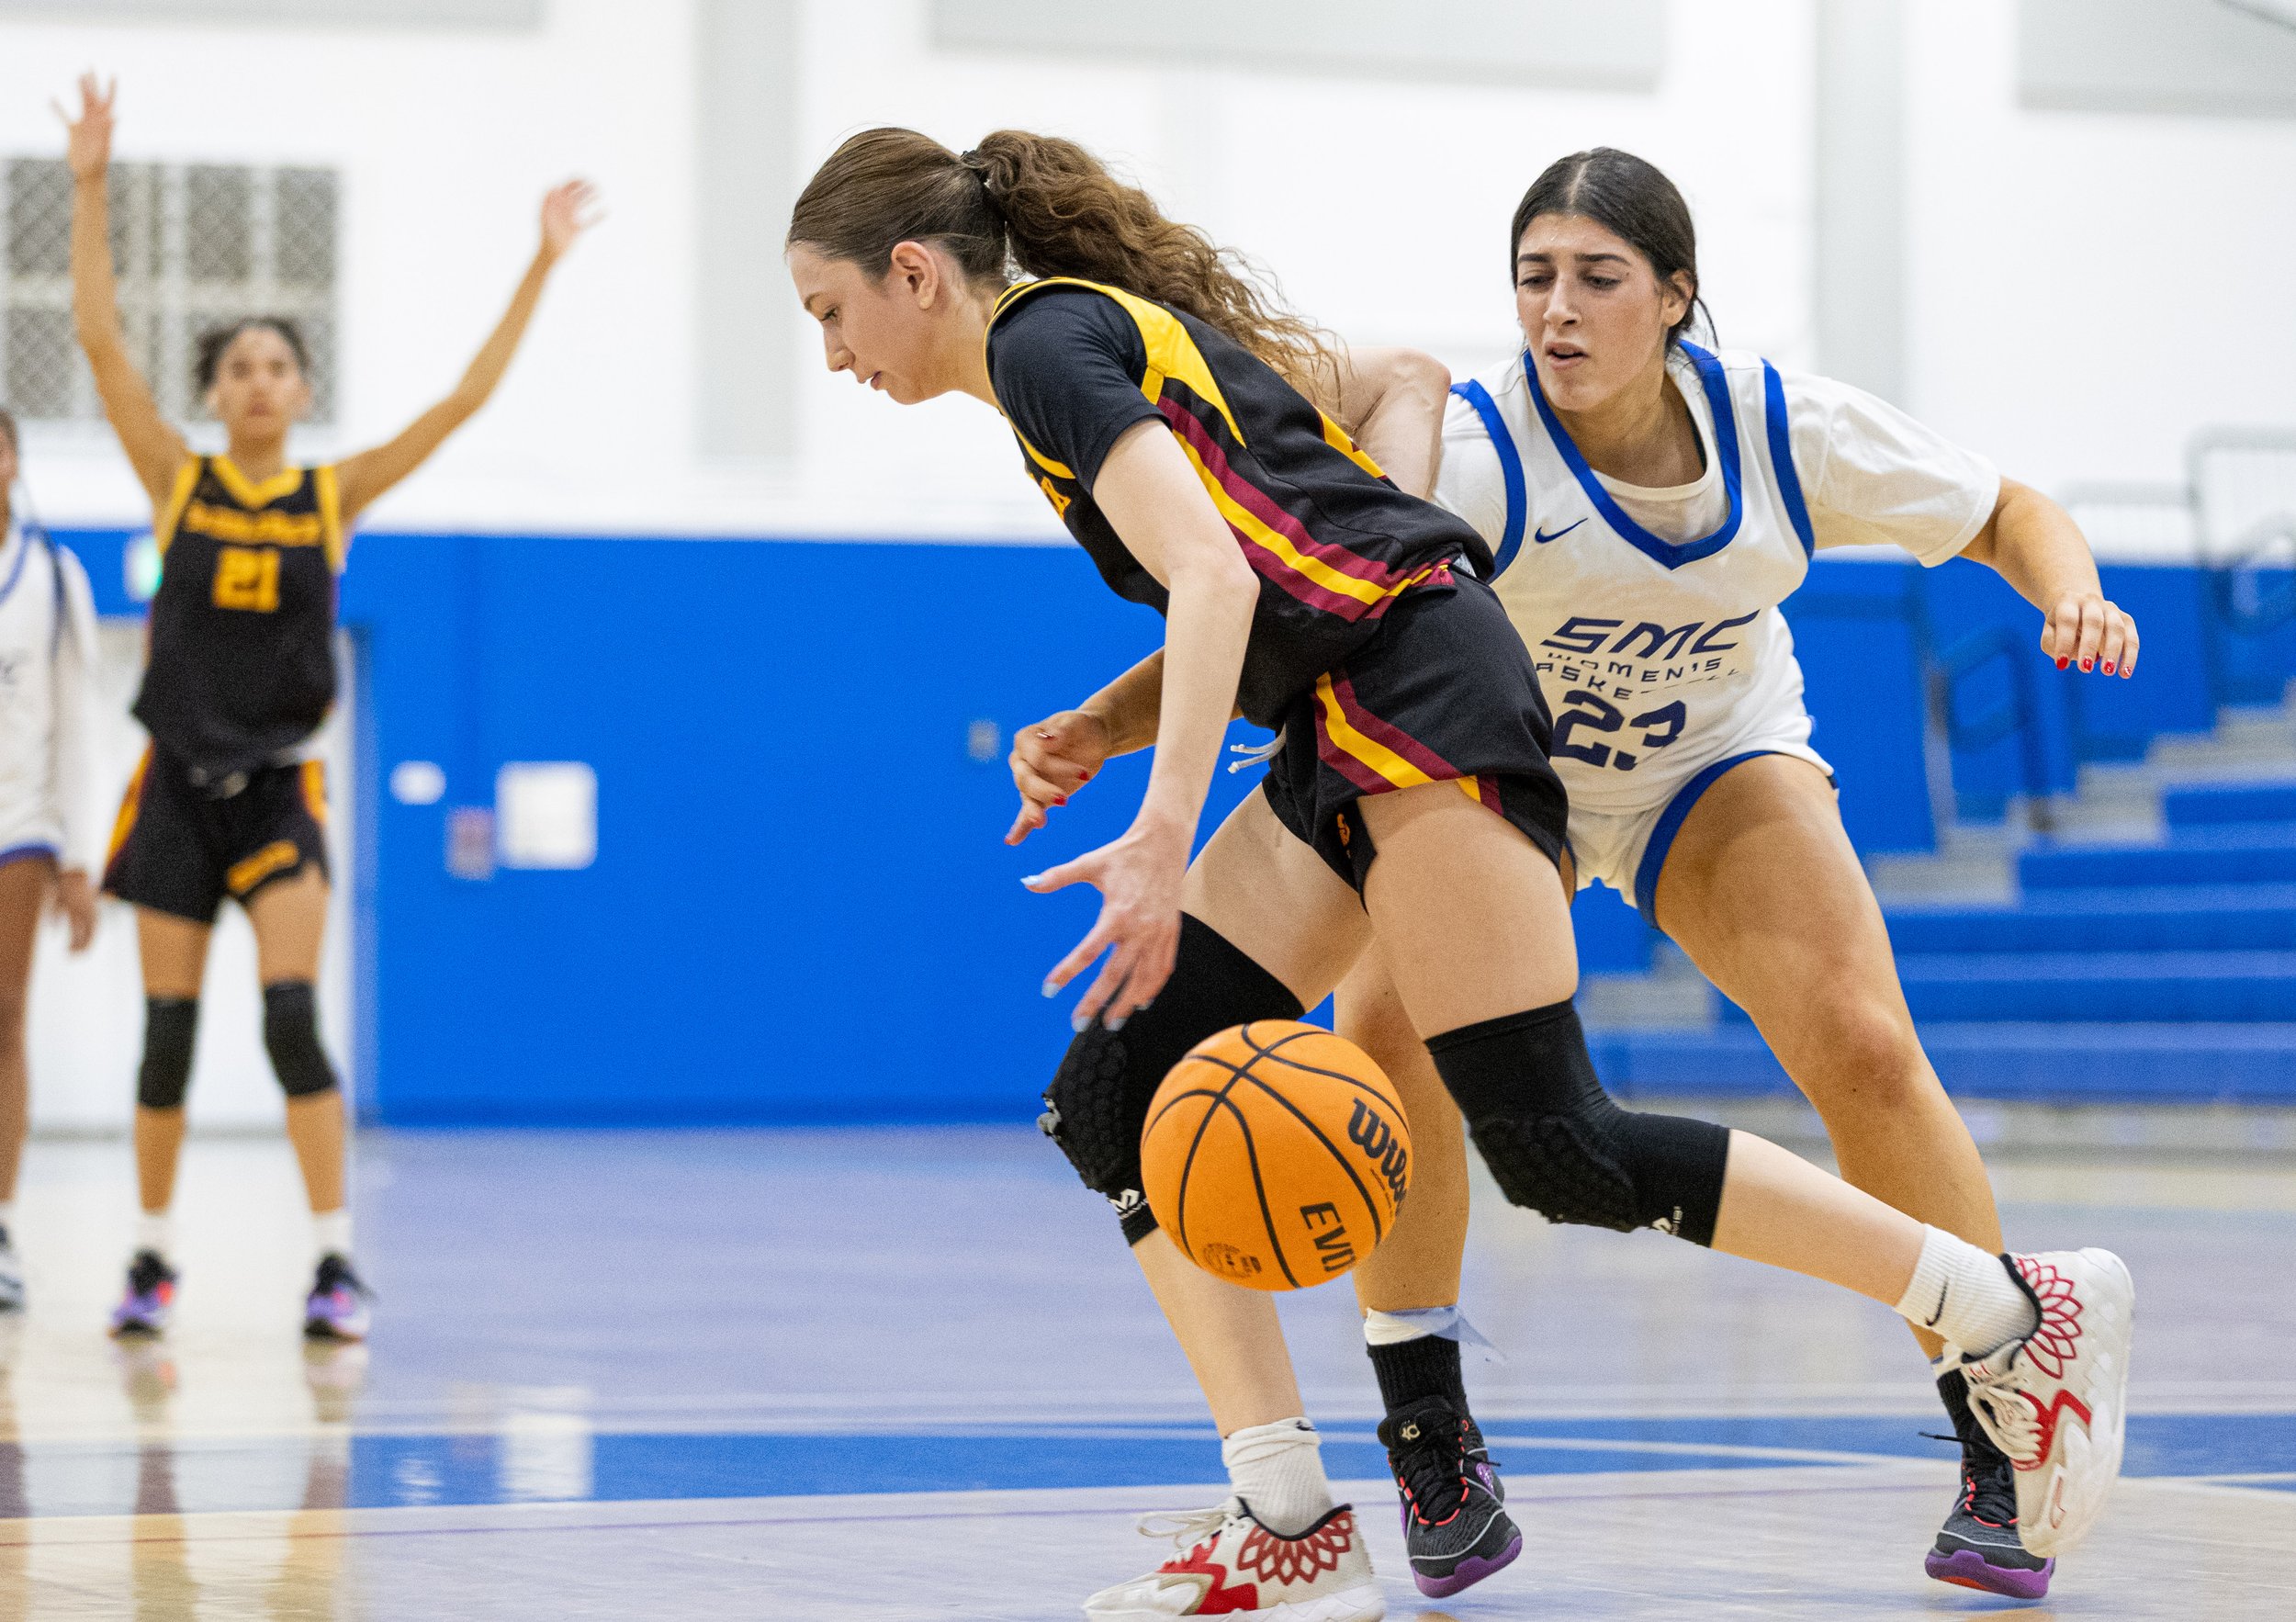  Corsair forward Nicole Mansouri(23) from Santa Monica College(SMC) attempting to stop Saddleback College Bobcat Aleksia Gadea(L) from making it to the other side of the court in the SMC Pavillion Gym at Santa Monica, Calif. Corsairs lost 62-50 to pu